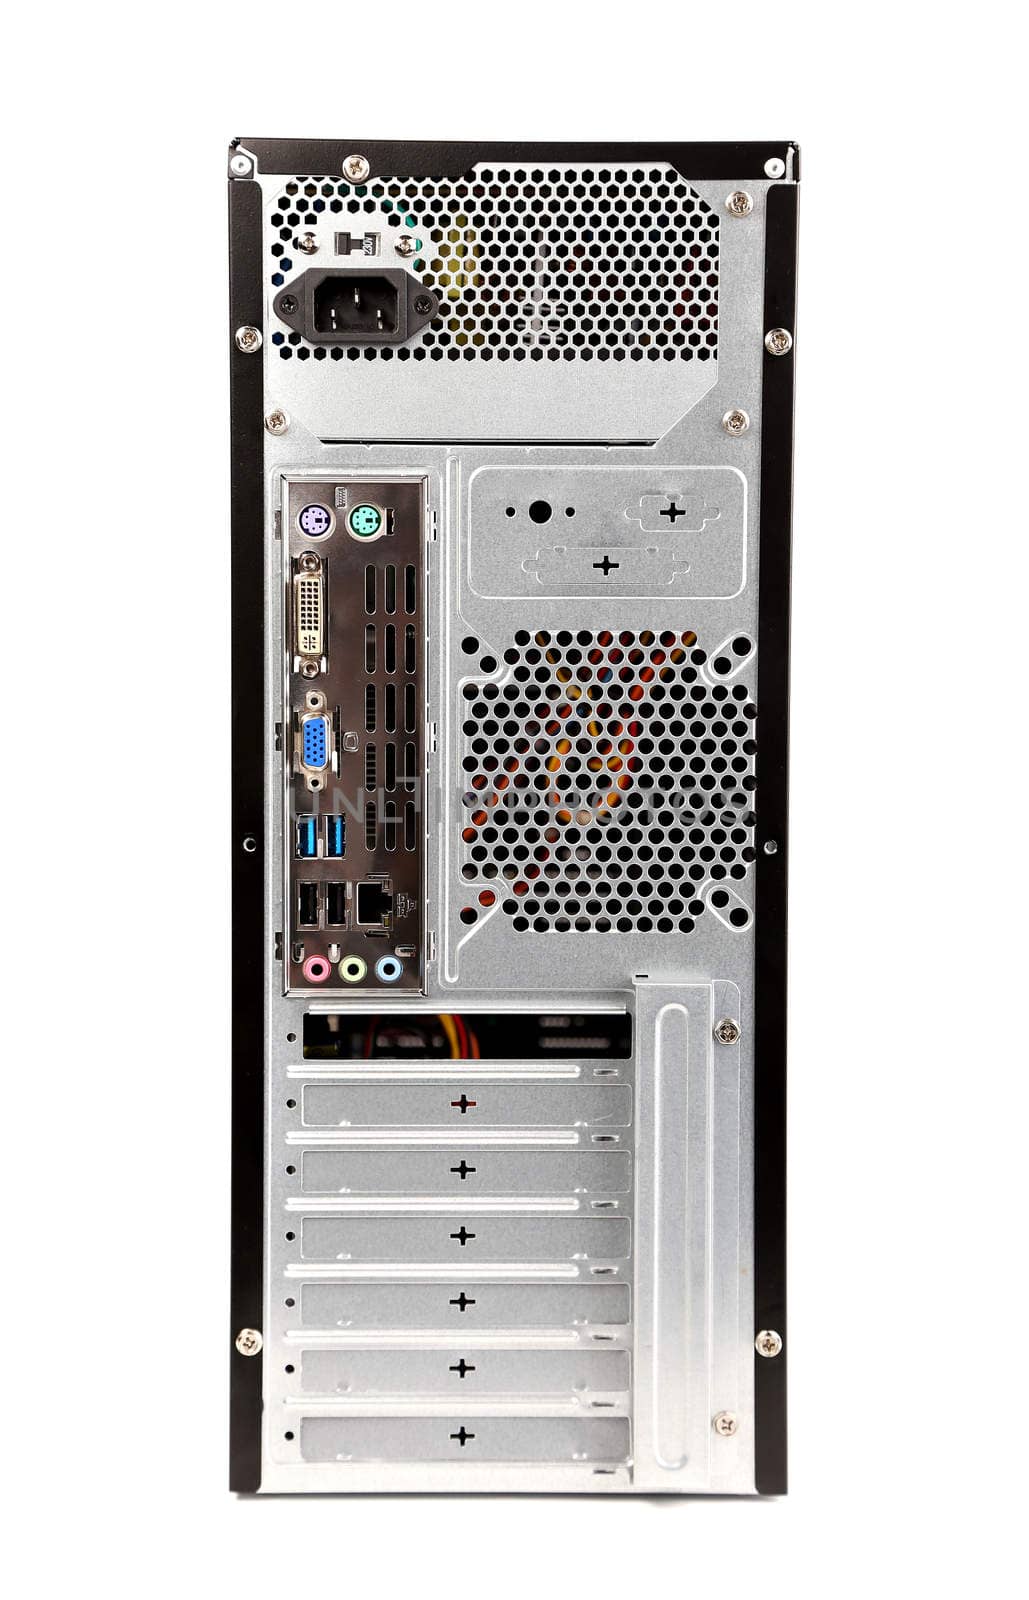 rear panel of the system unit on a white background